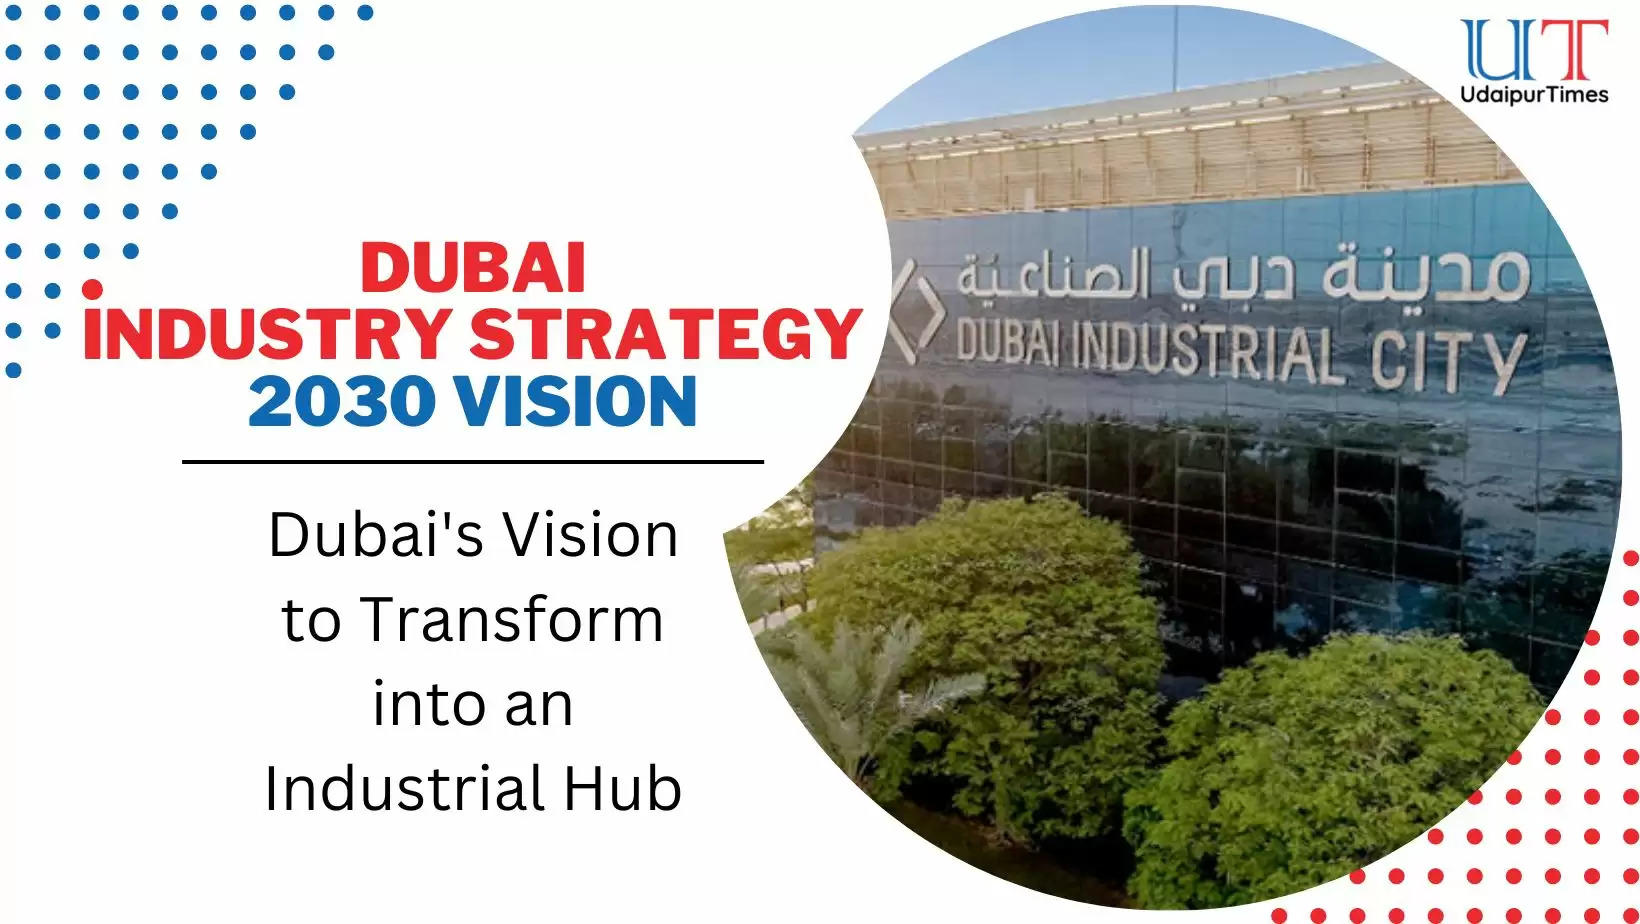 Dubai Industry Strategy 2030 Vision Dubai has a vision to transform itself into a global manufacturing and industrial hub